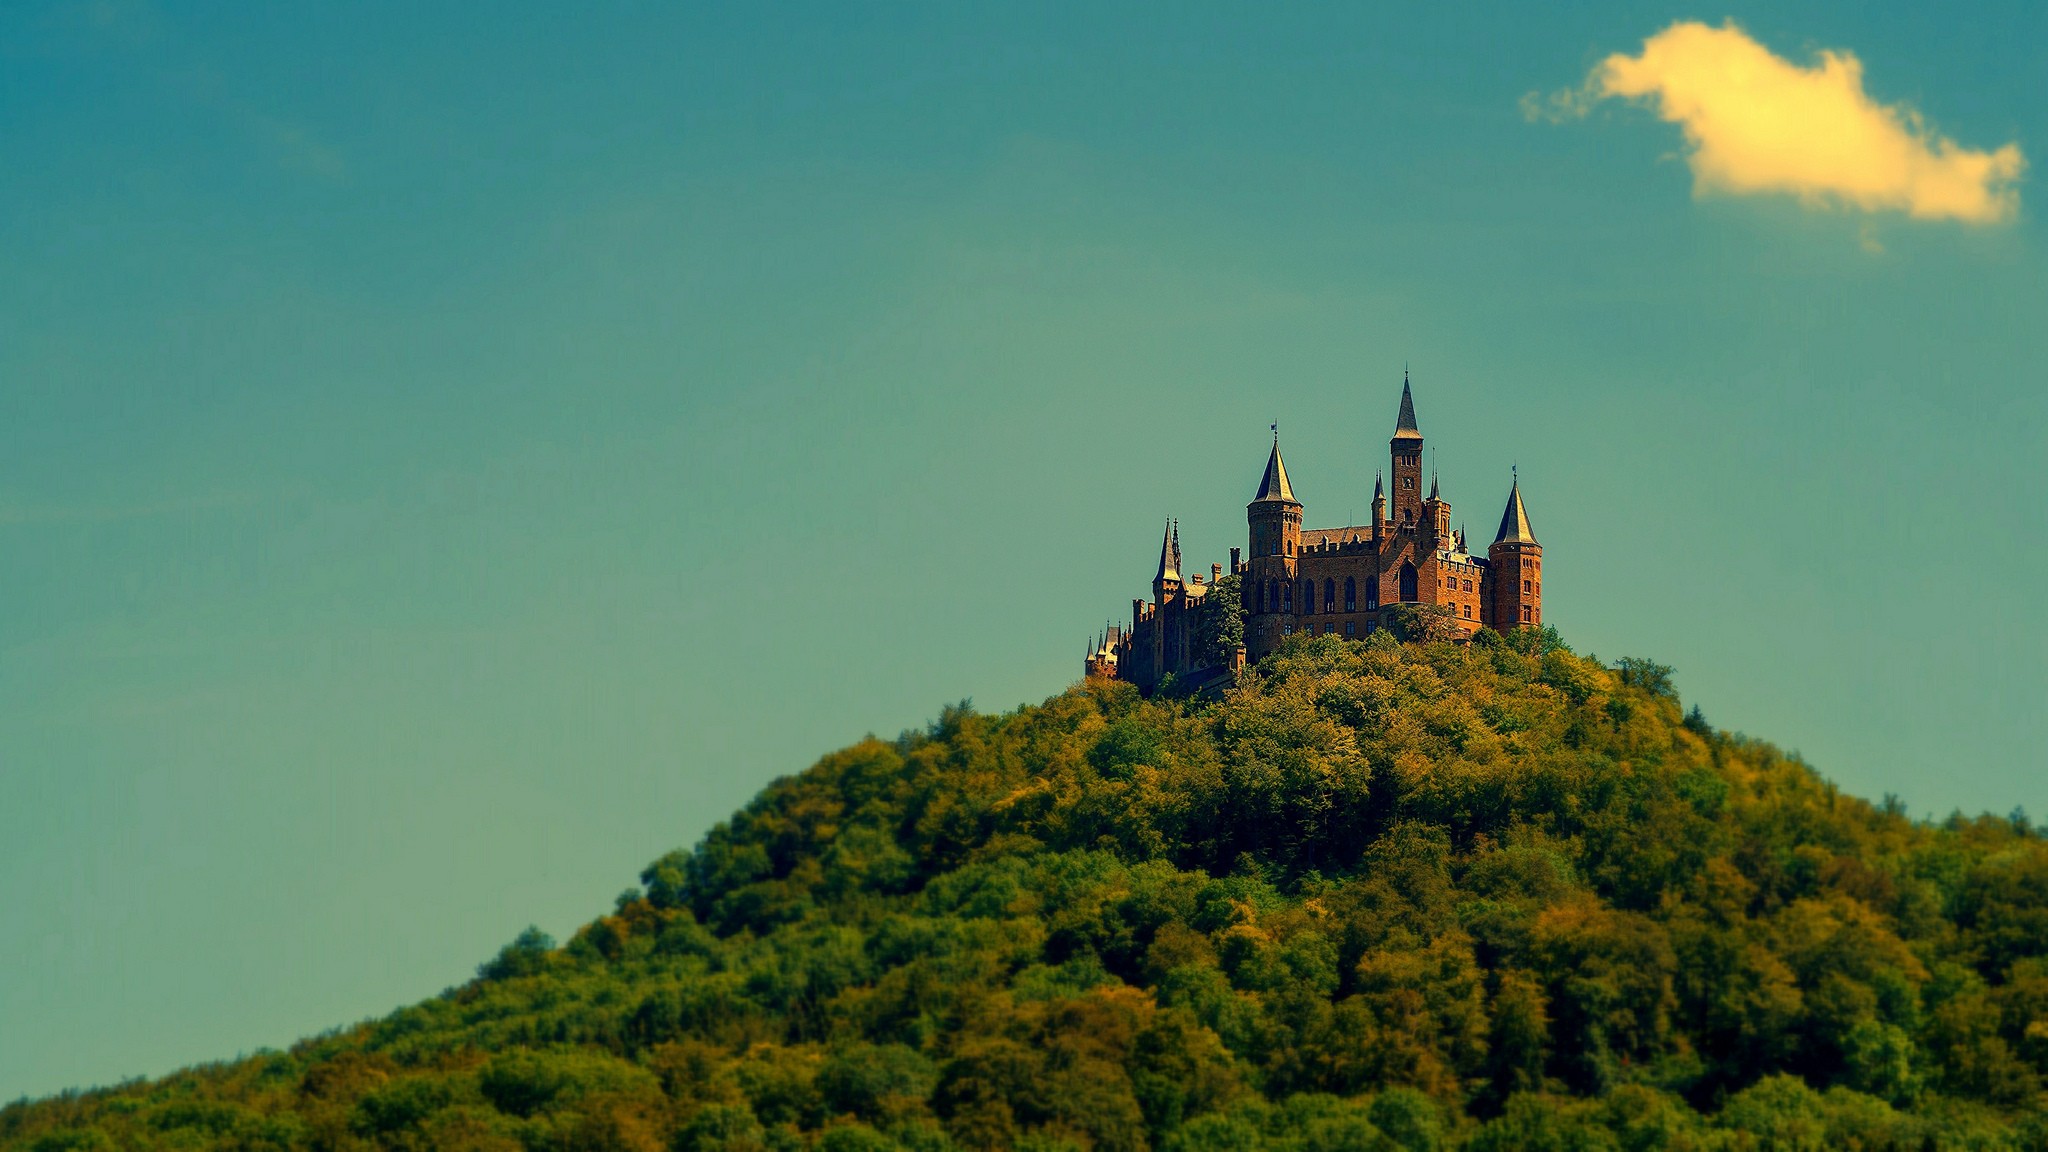 General 2048x1152 architecture castle nature landscape trees Germany hills forest tower clouds photography Hohenzollern Castle